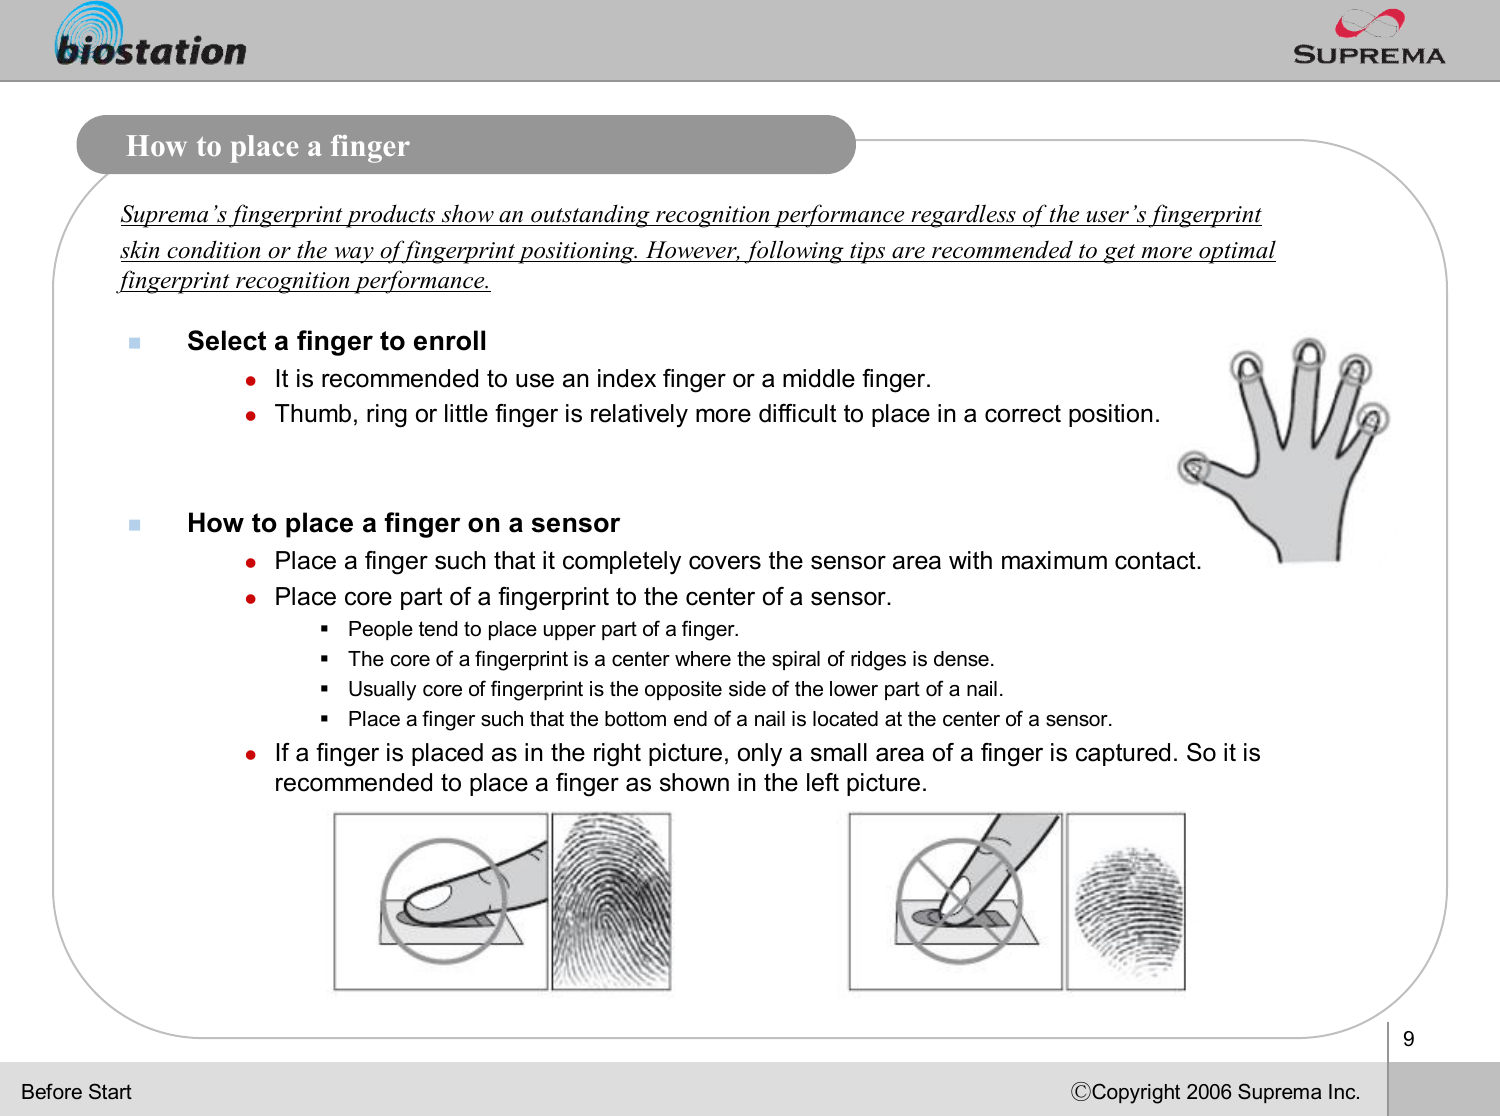 9ⒸCopyright 2006 Suprema Inc.How to place a fingernSelect a finger to enrolllIt is recommended to use an index finger or a middle finger. lThumb, ring or little finger is relatively more difficult to place in a correct position.nHow to place a finger on a sensorlPlace a finger such that it completely covers the sensor area with maximum contact. lPlace core part of a fingerprint to the center of a sensor.§People tend to place upper part of a finger.§The core of a fingerprint is a center where the spiral of ridgesis dense. §Usually core of fingerprint is the opposite side of the lower part of a nail. §Place a finger such that the bottom end of a nail is located at the center of a sensor.lIf a finger is placed as in the right picture, only a small areaof a finger is captured. So it is recommended to place a finger as shown in the left picture. Suprema’s fingerprint products show an outstanding recognition performance regardless of the user’s fingerprint skin condition or the way of fingerprint positioning. However, following tips are recommended to get more optimal fingerprint recognition performance.Before Start